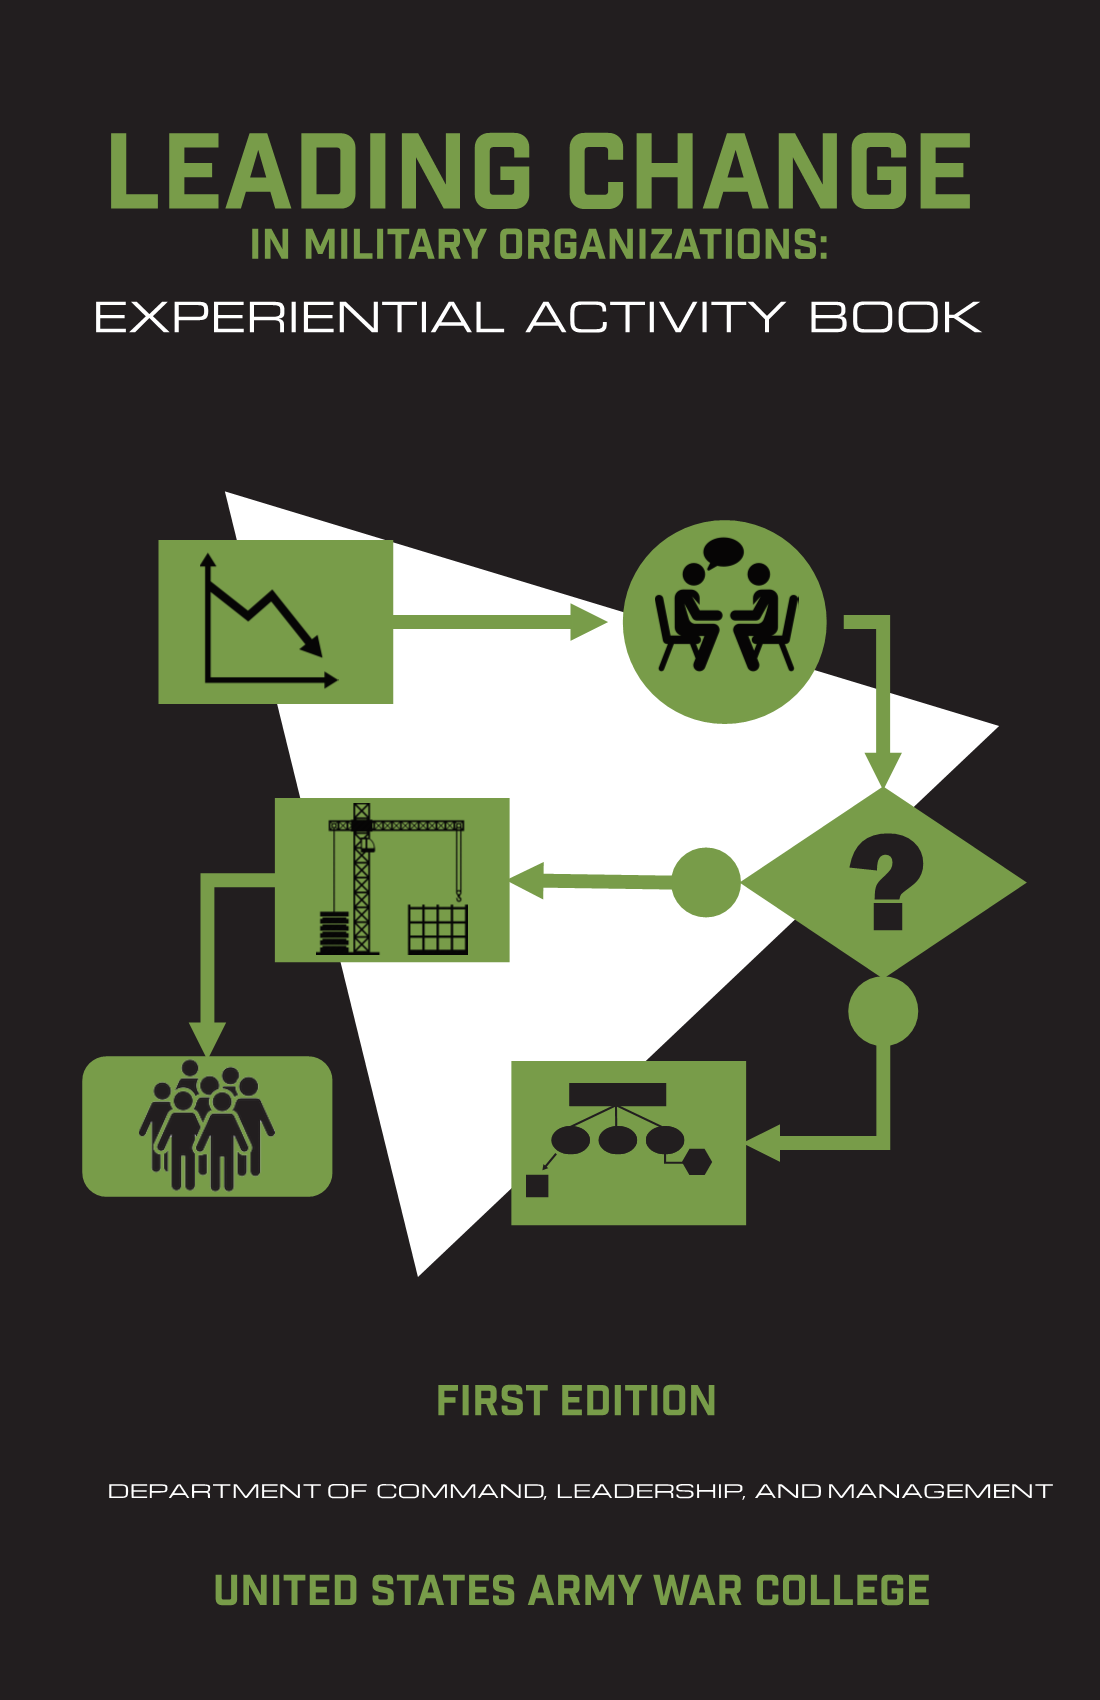  Leading Change in Military Organizations: Experiential Activity Book